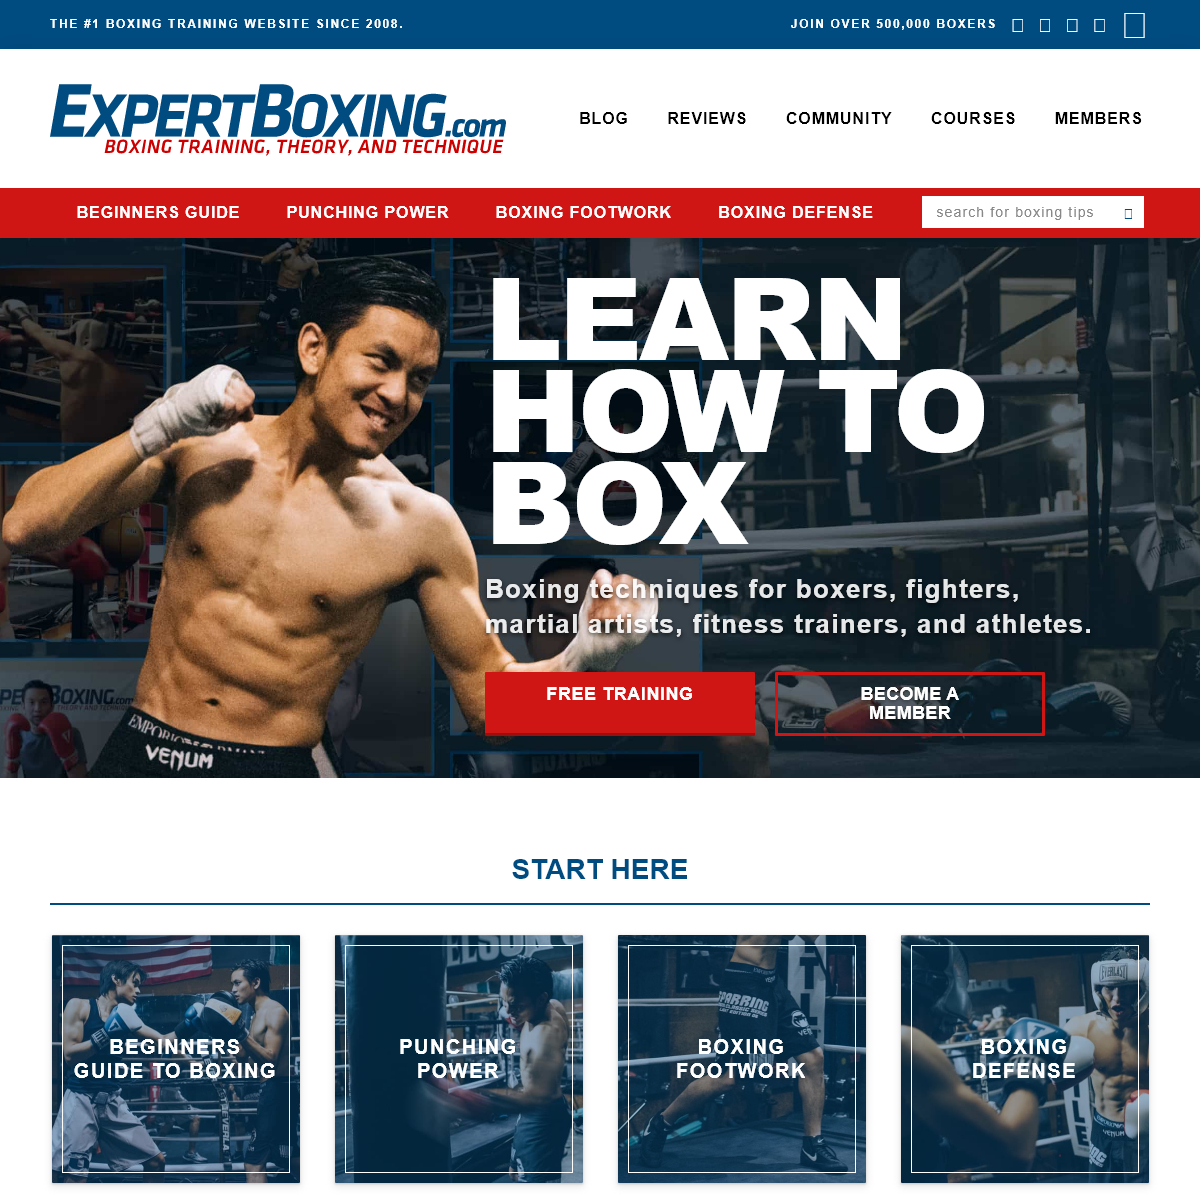 A complete backup of expertboxing.com